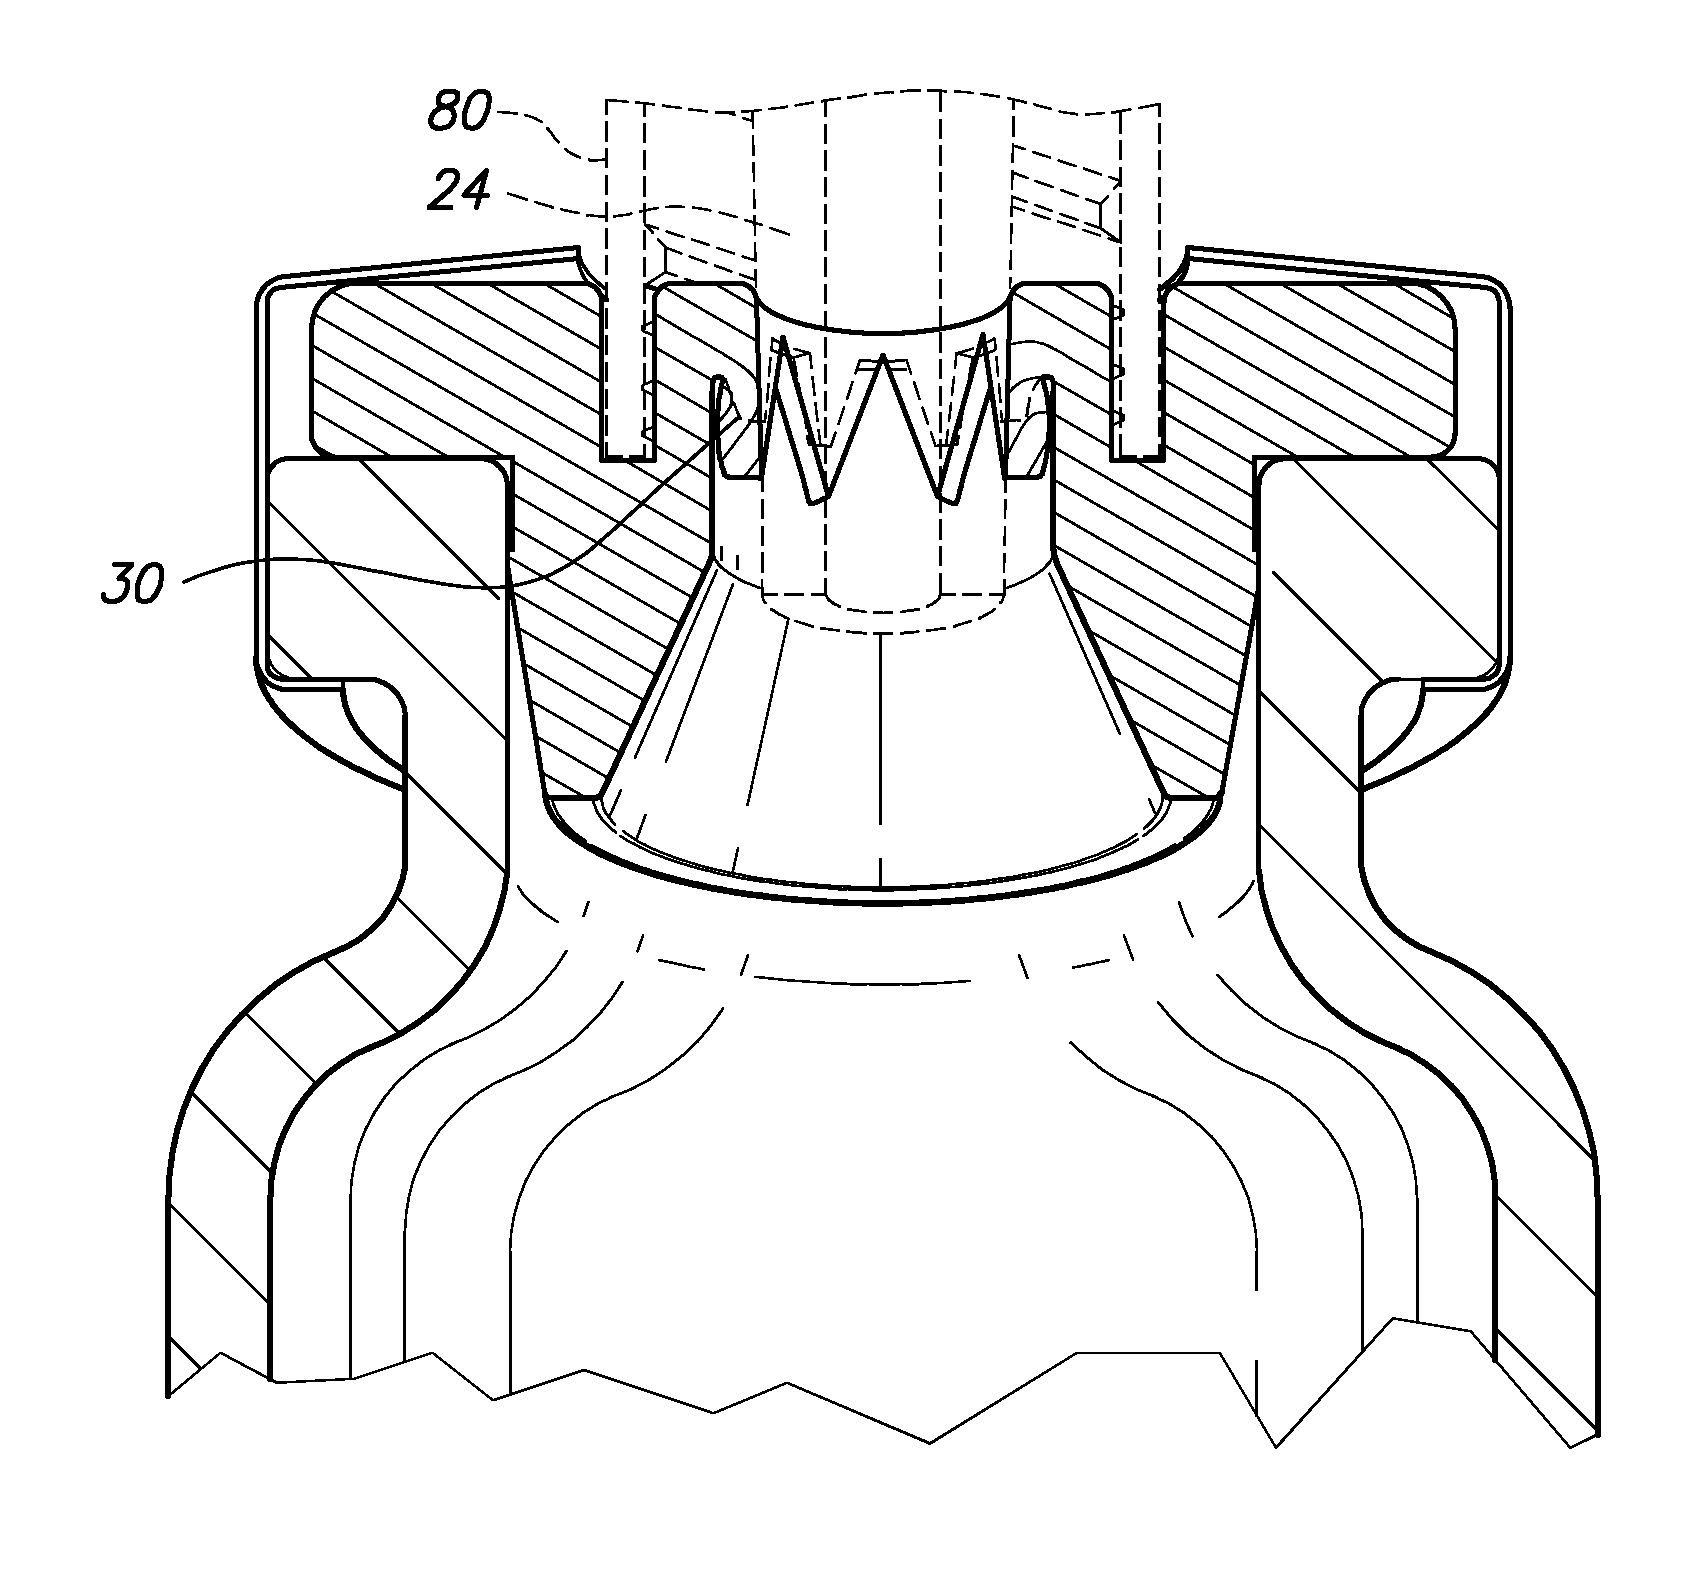 Coupling system to transfer material between containers